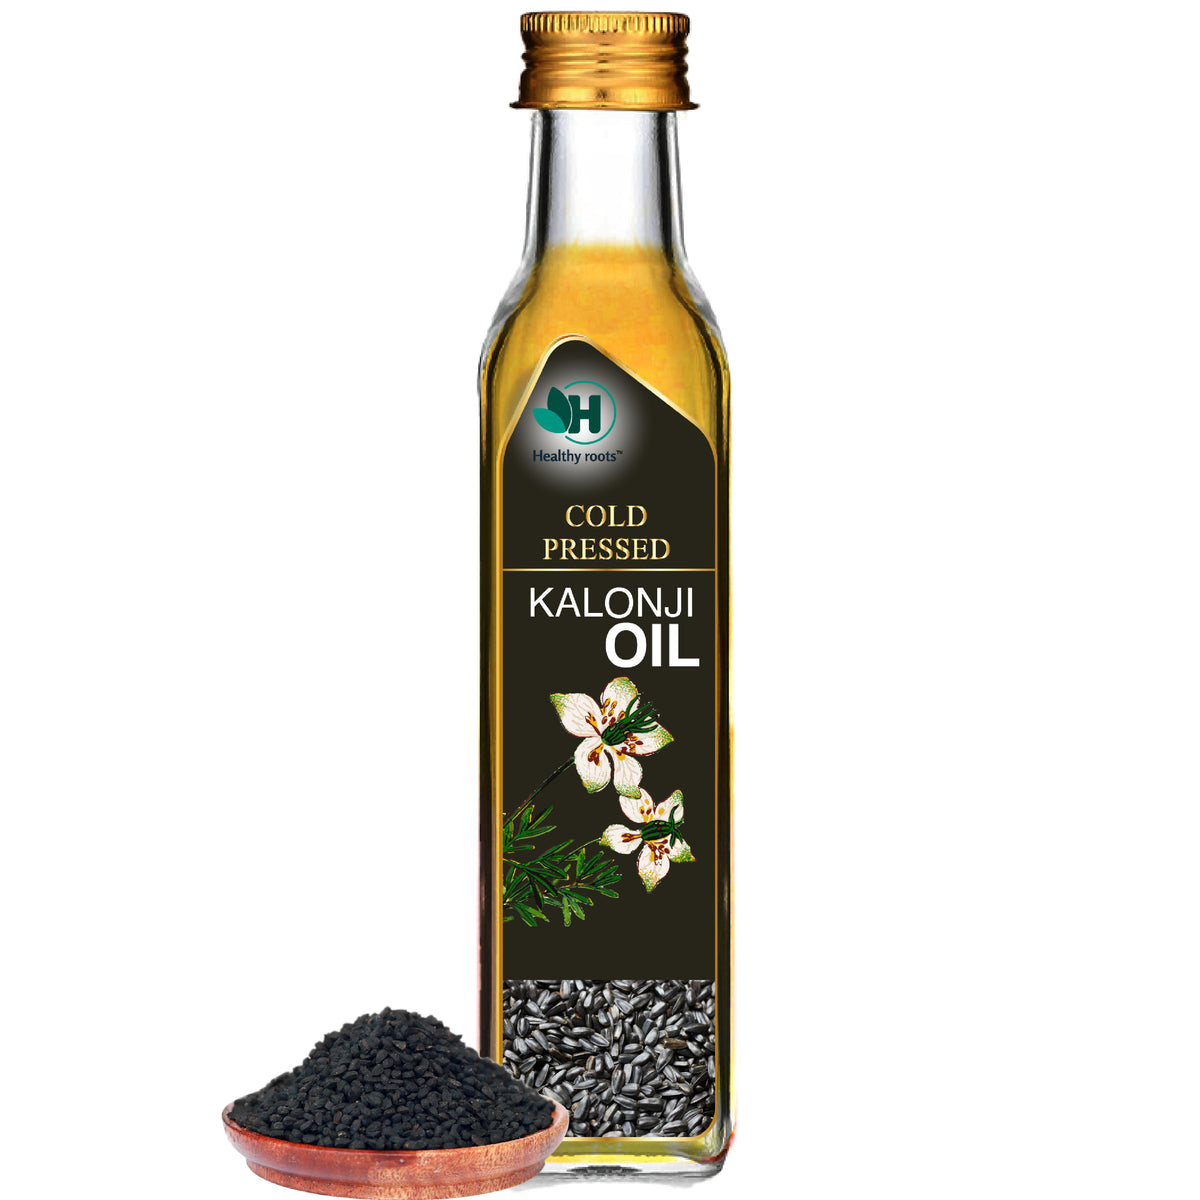 Best cold pressed kalonji oil in mumbai | Healthy roots – Healthyroots